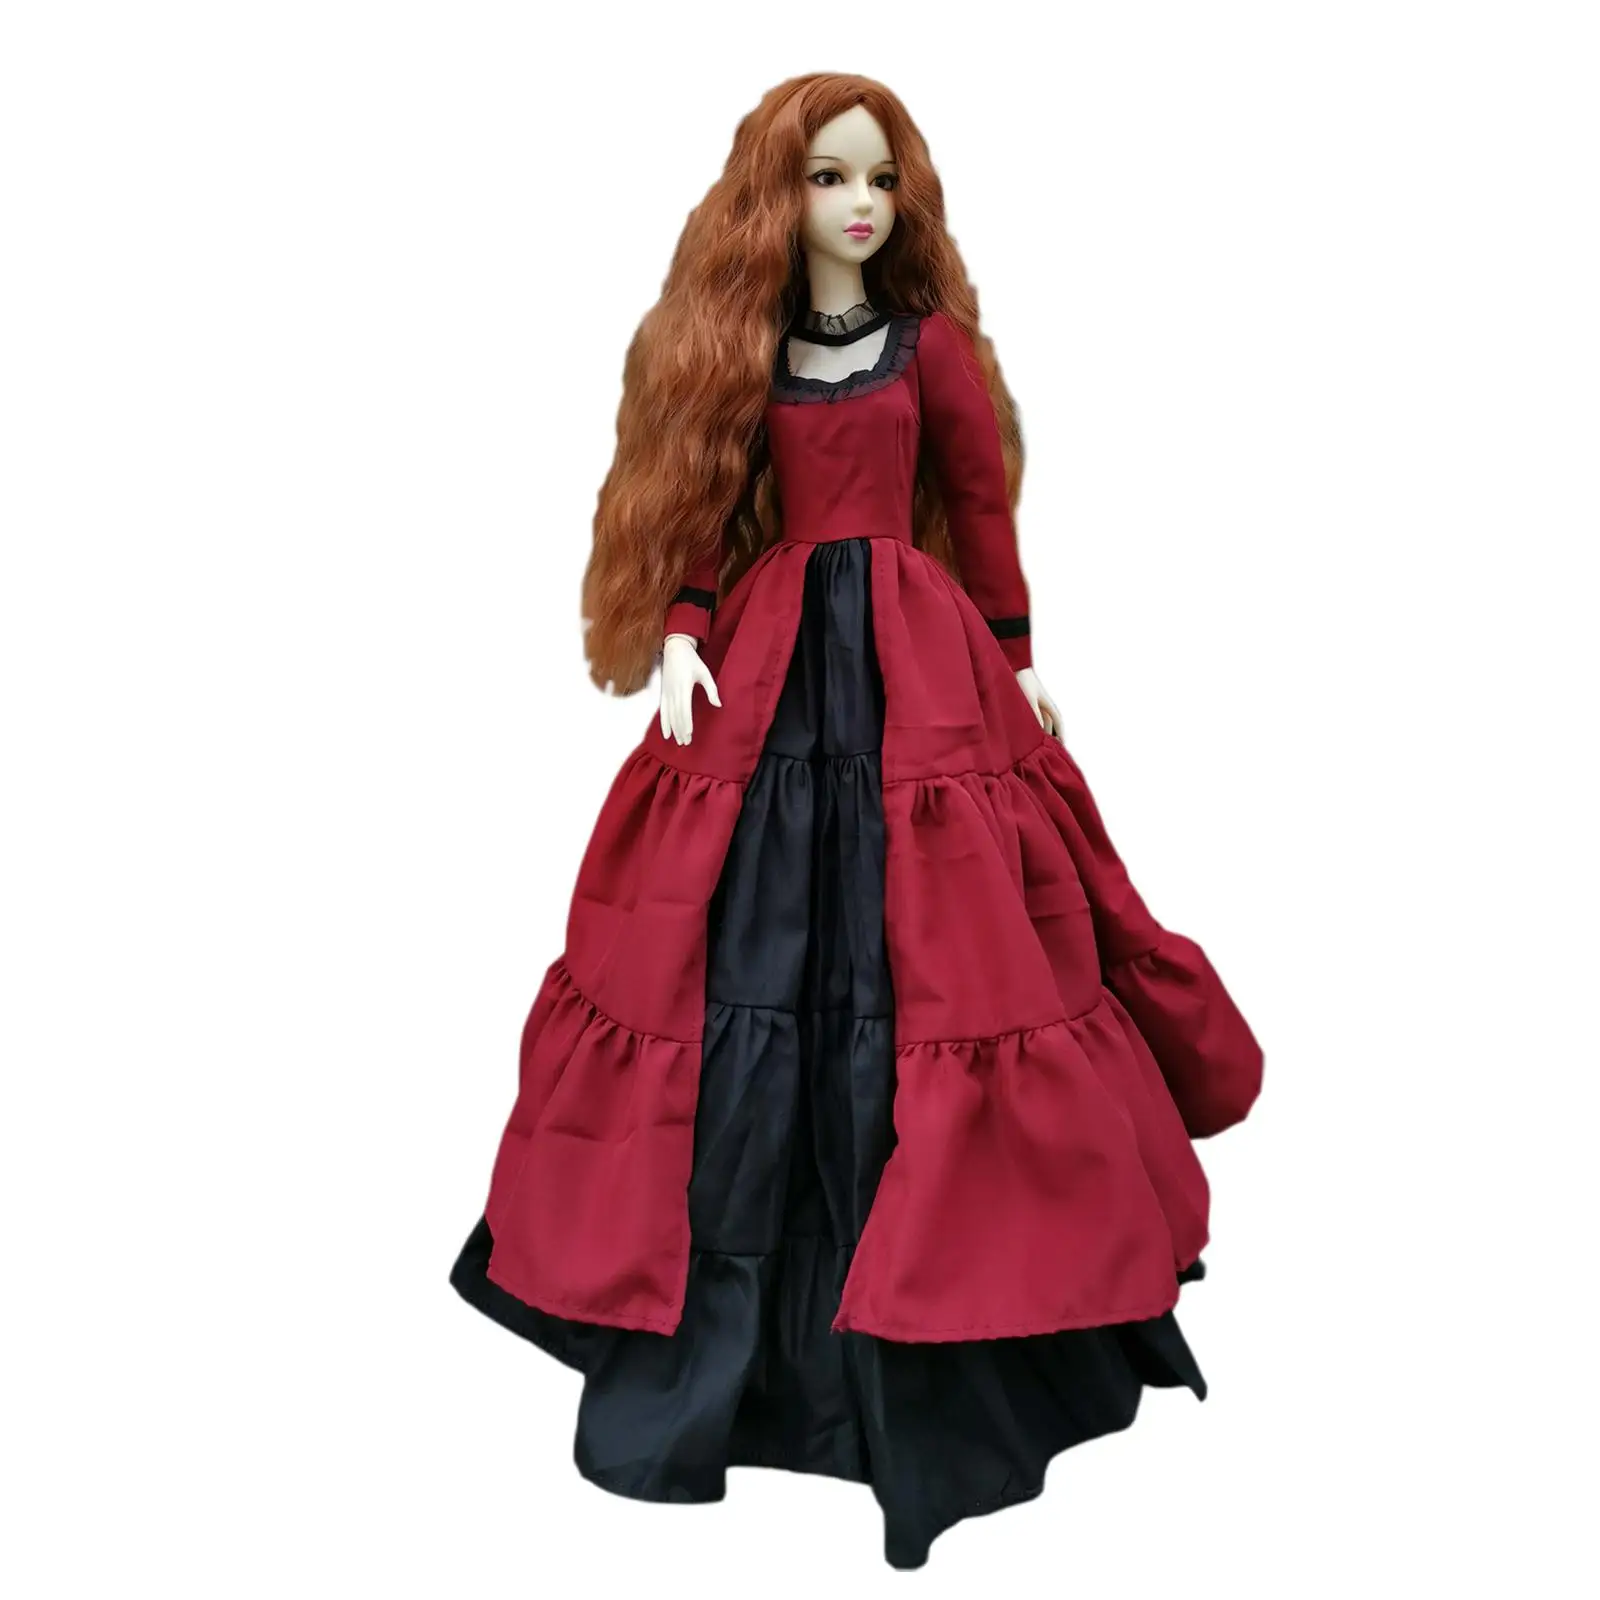 Ball Jointed Doll 1/3 Dolls with Beautiful Doll Clothes , Action Figures for Birthday Gift, Kids, Women